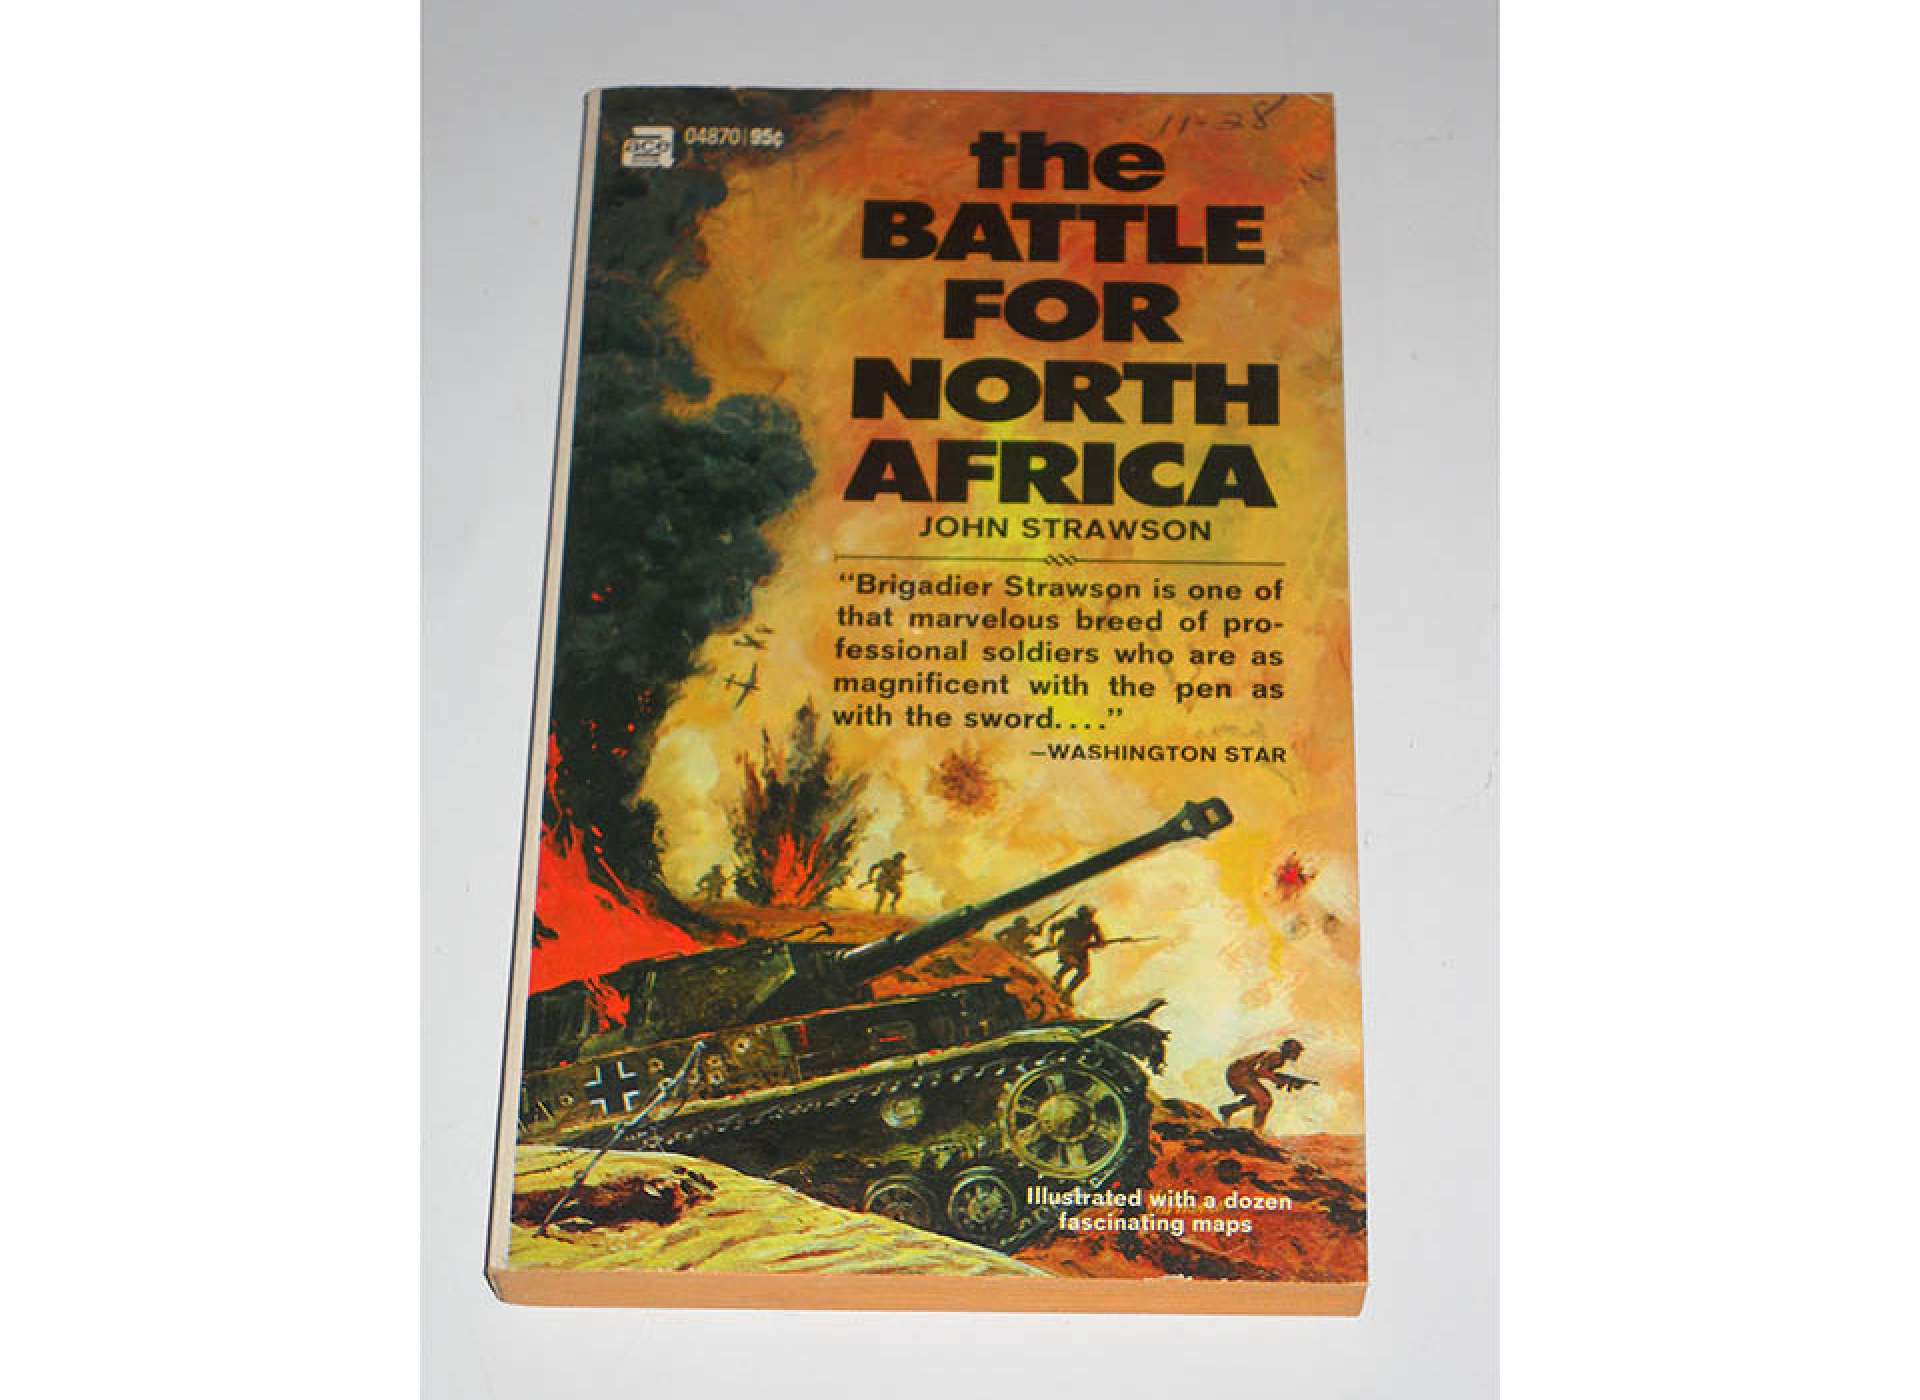 The Battle for North Africa. Courtesy of Amazon.com